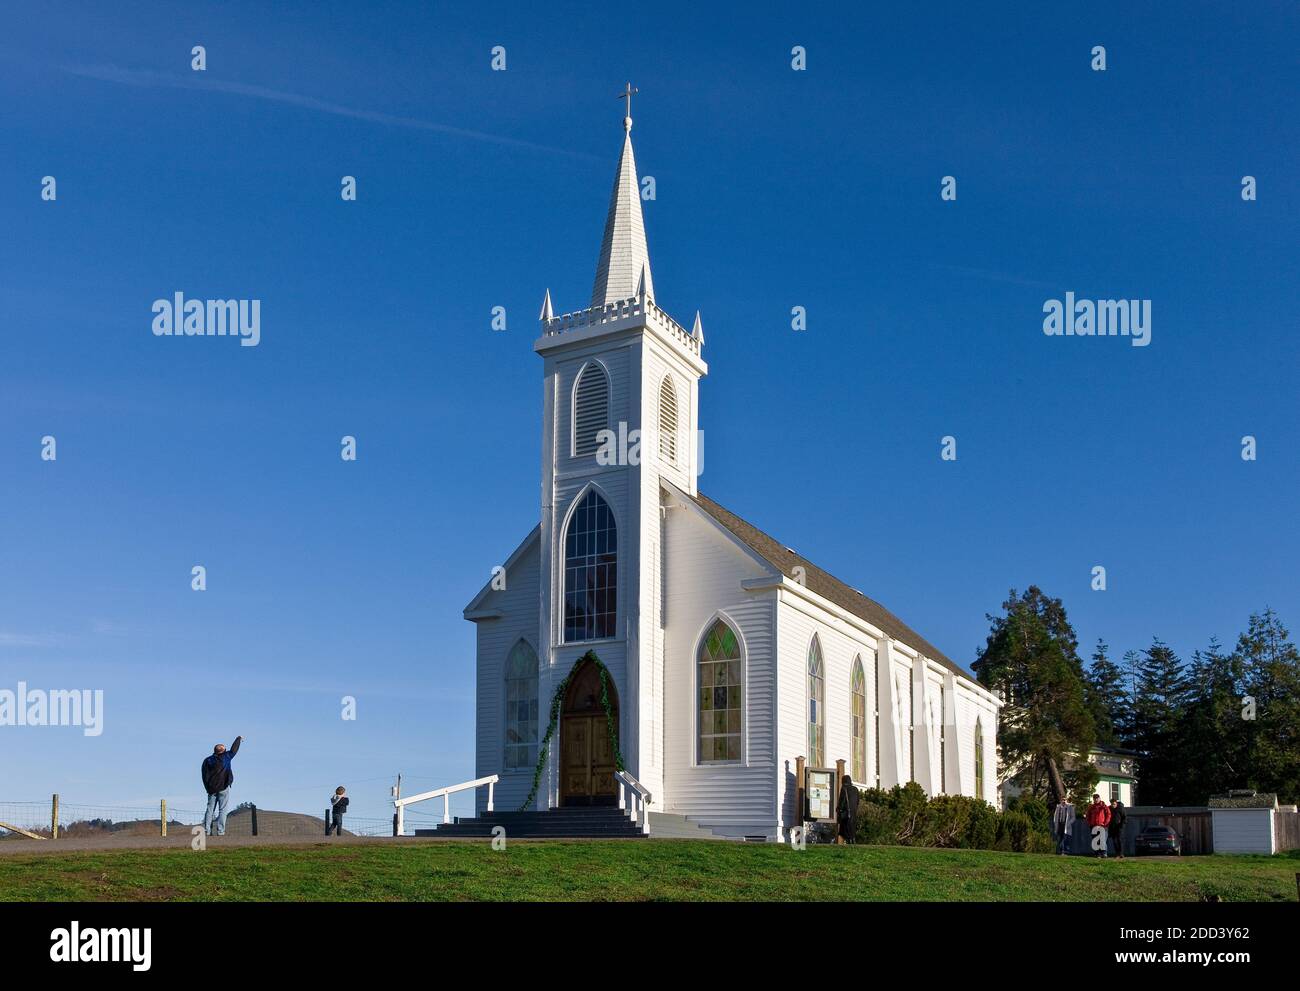 The Church of Saint Teresa of Avila in Bodega, a town in Sonoma County in Northern California, USA. The church was built of redwood in 1859. Stock Photo